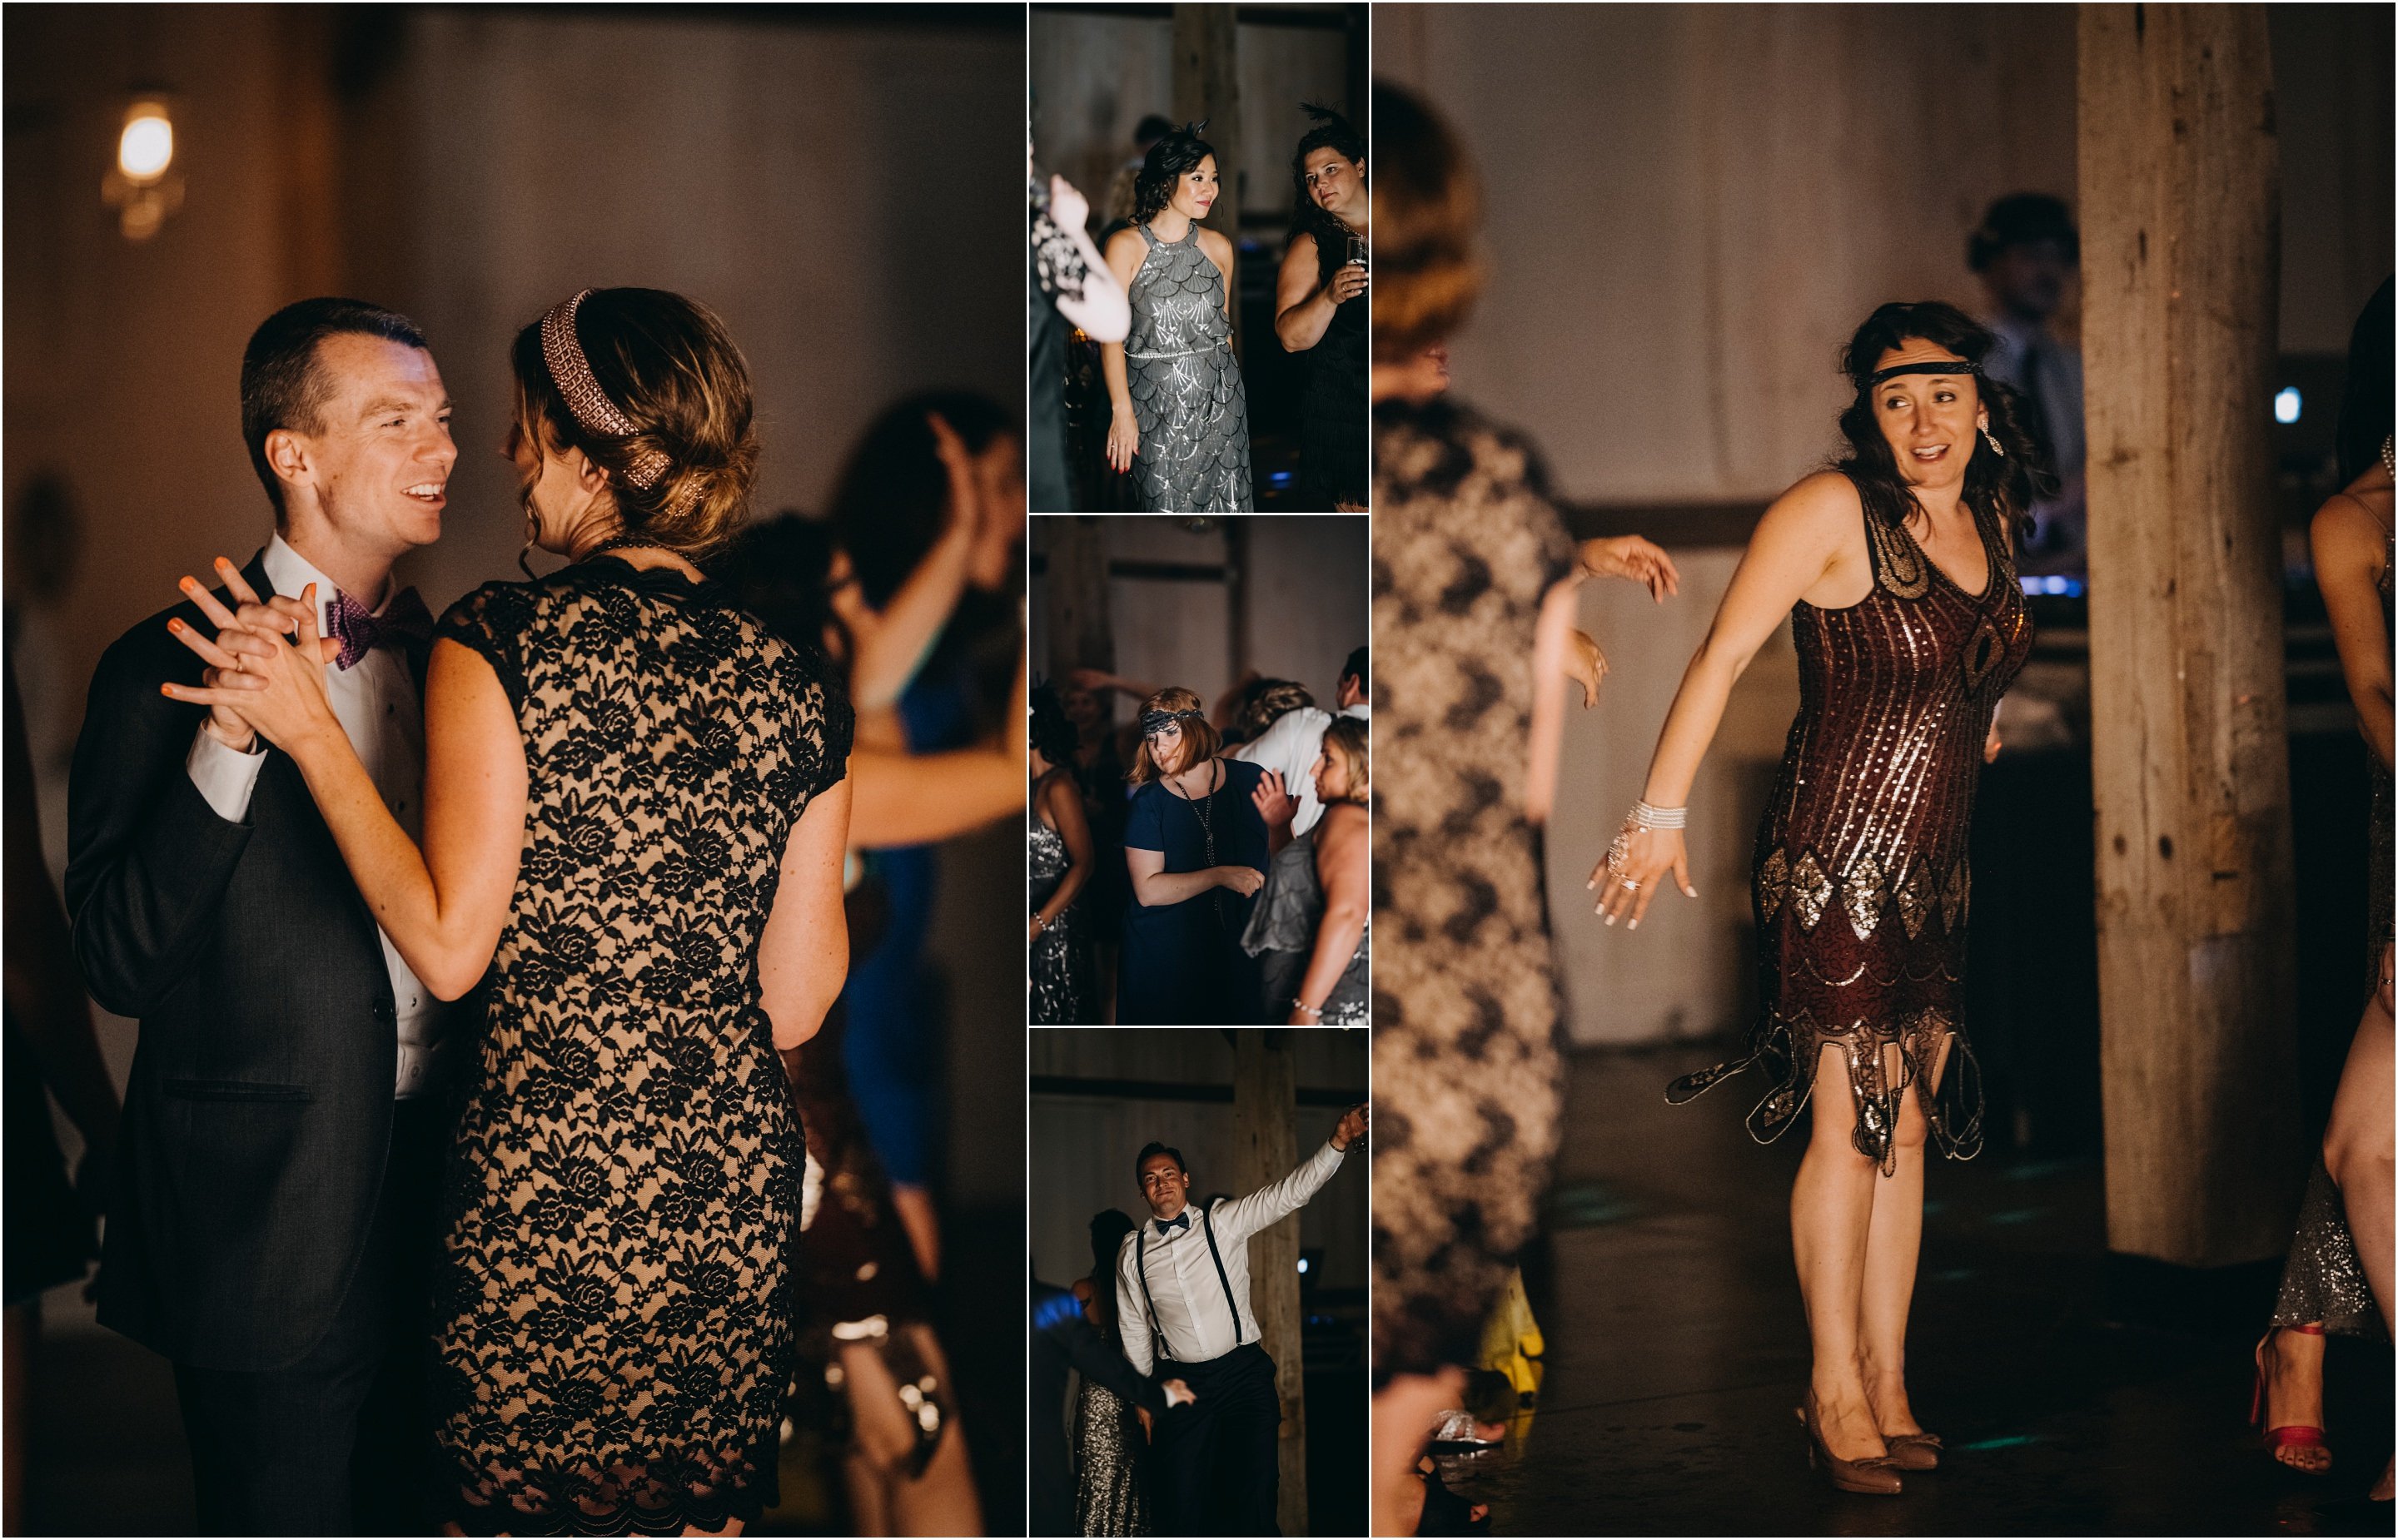 Stonefields Great Gatsby Wedding - Cindy Lottes Photography